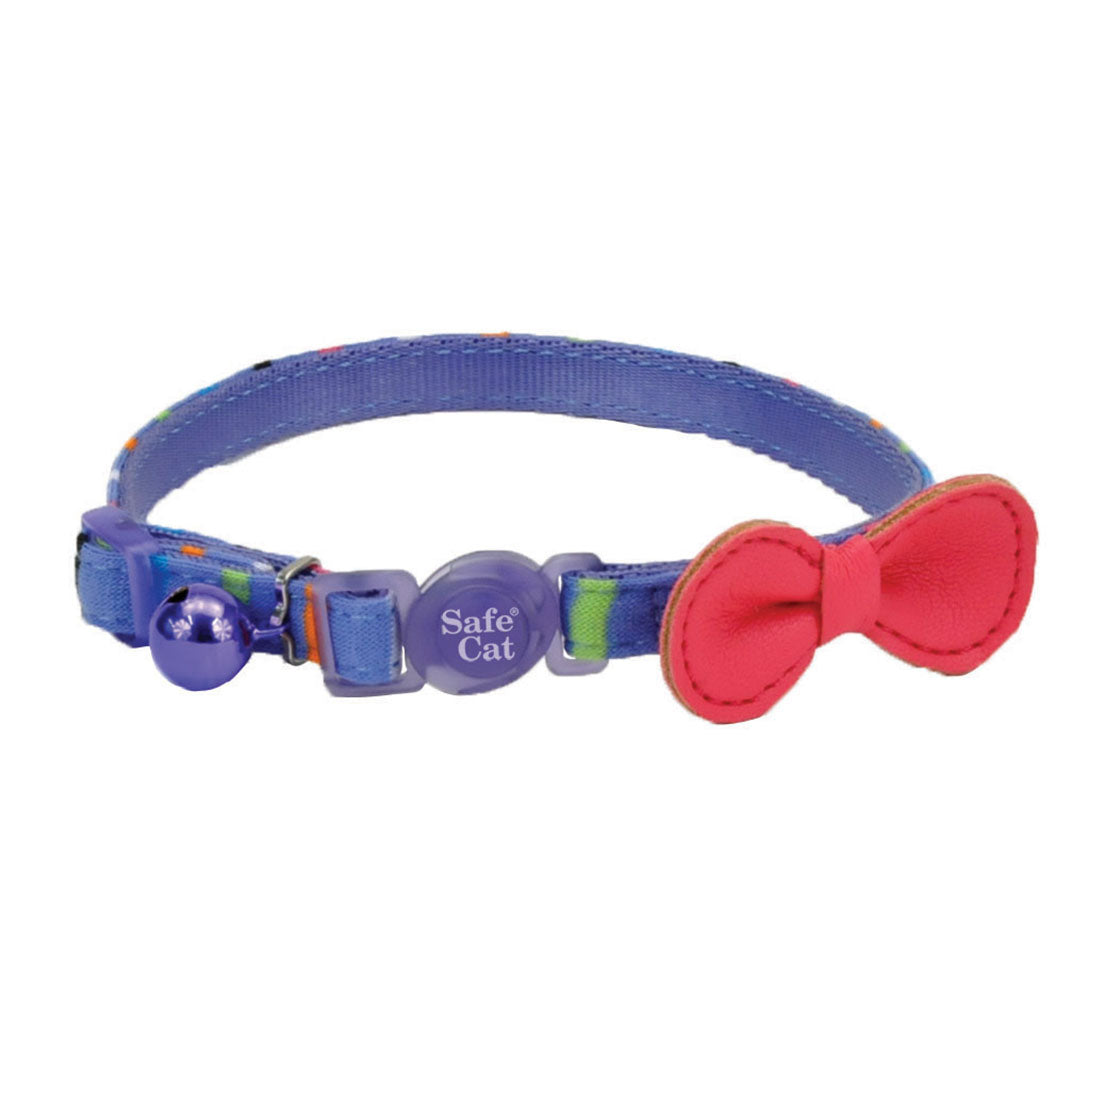 Safe Cat Striped Blue Collar With Bow